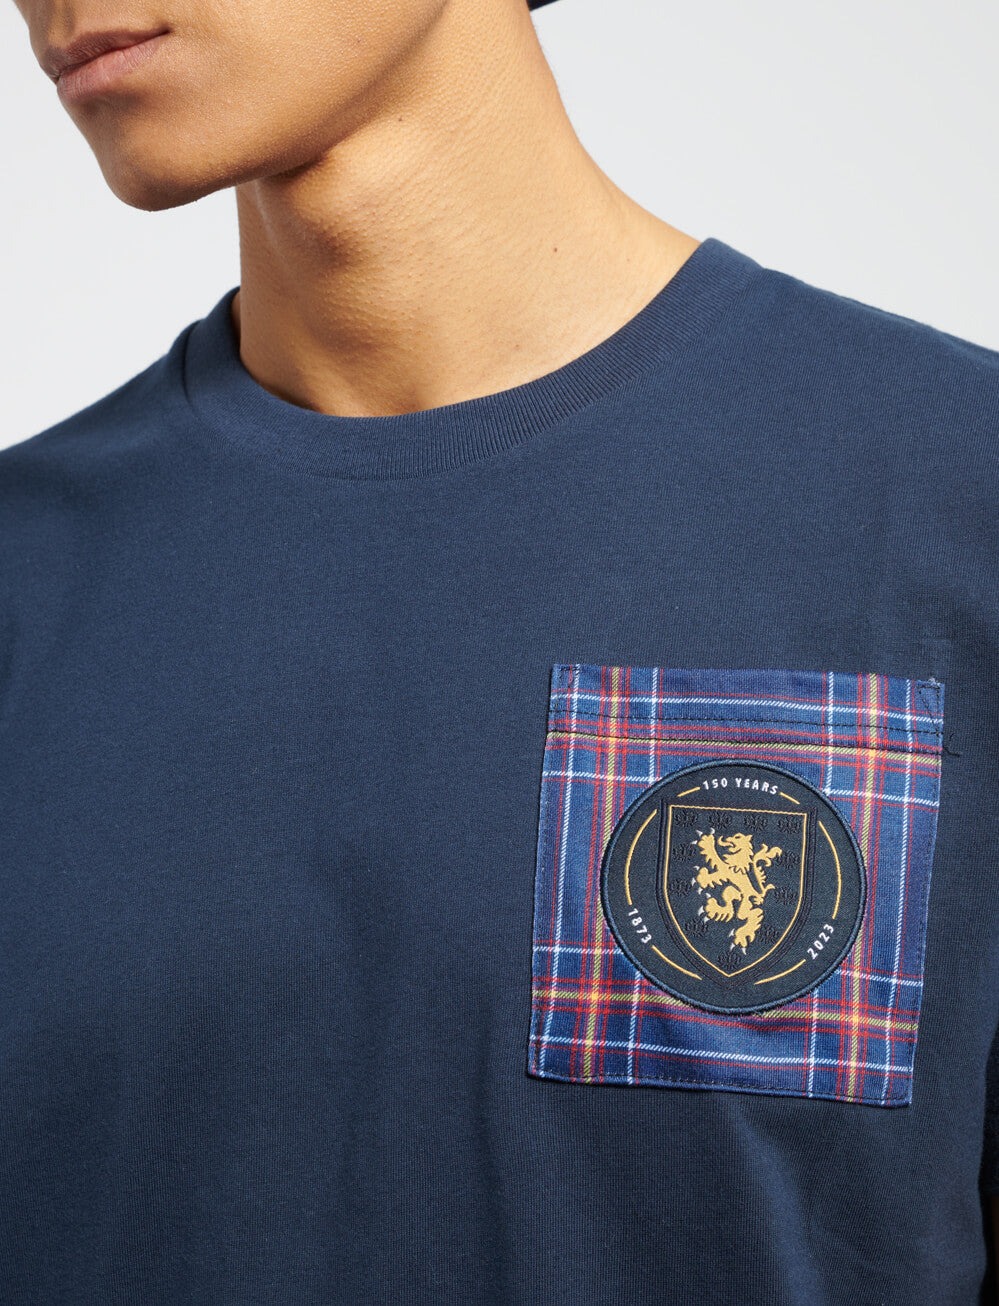 Official Team Scotland 150th Anniversary Check Pocket T-Shirt - The World Football Store